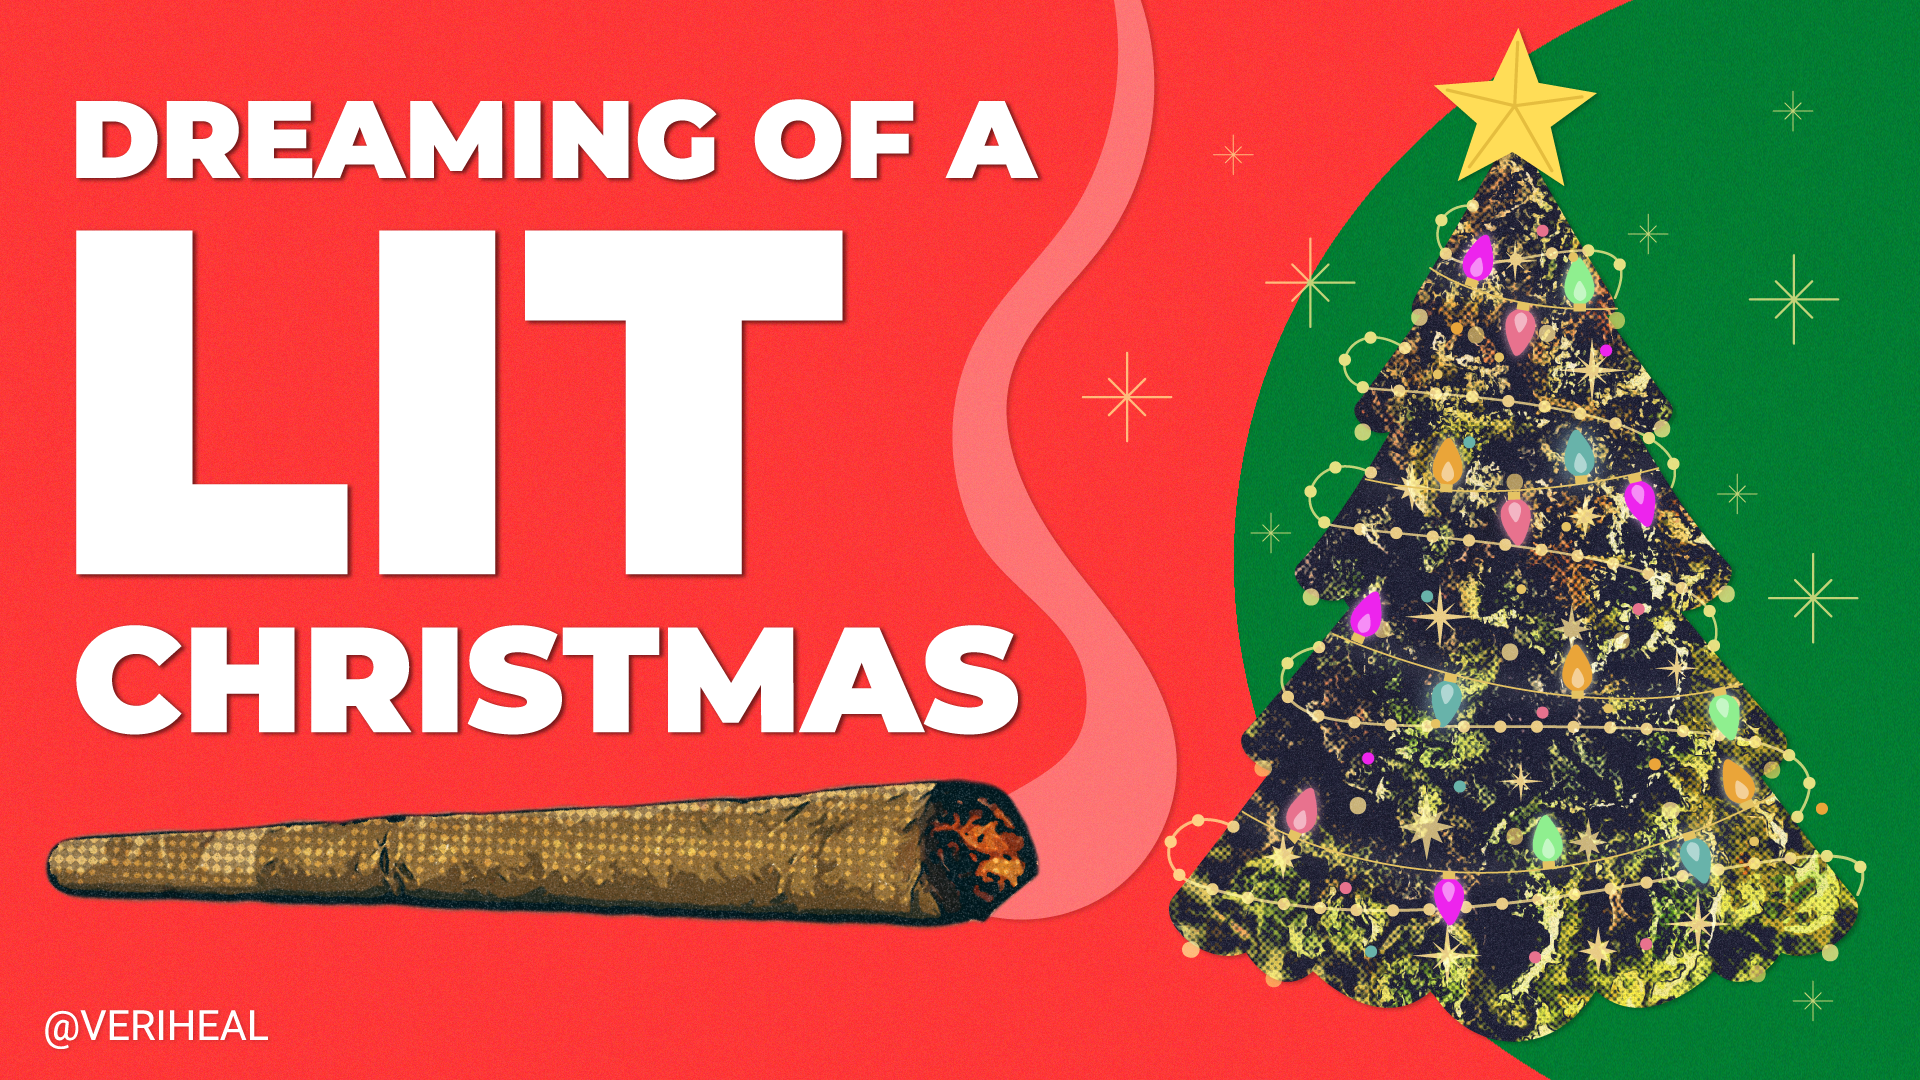 Dreaming of a Green Christmas: Americans Ditching Alcohol for Cannabis Over the Holidays